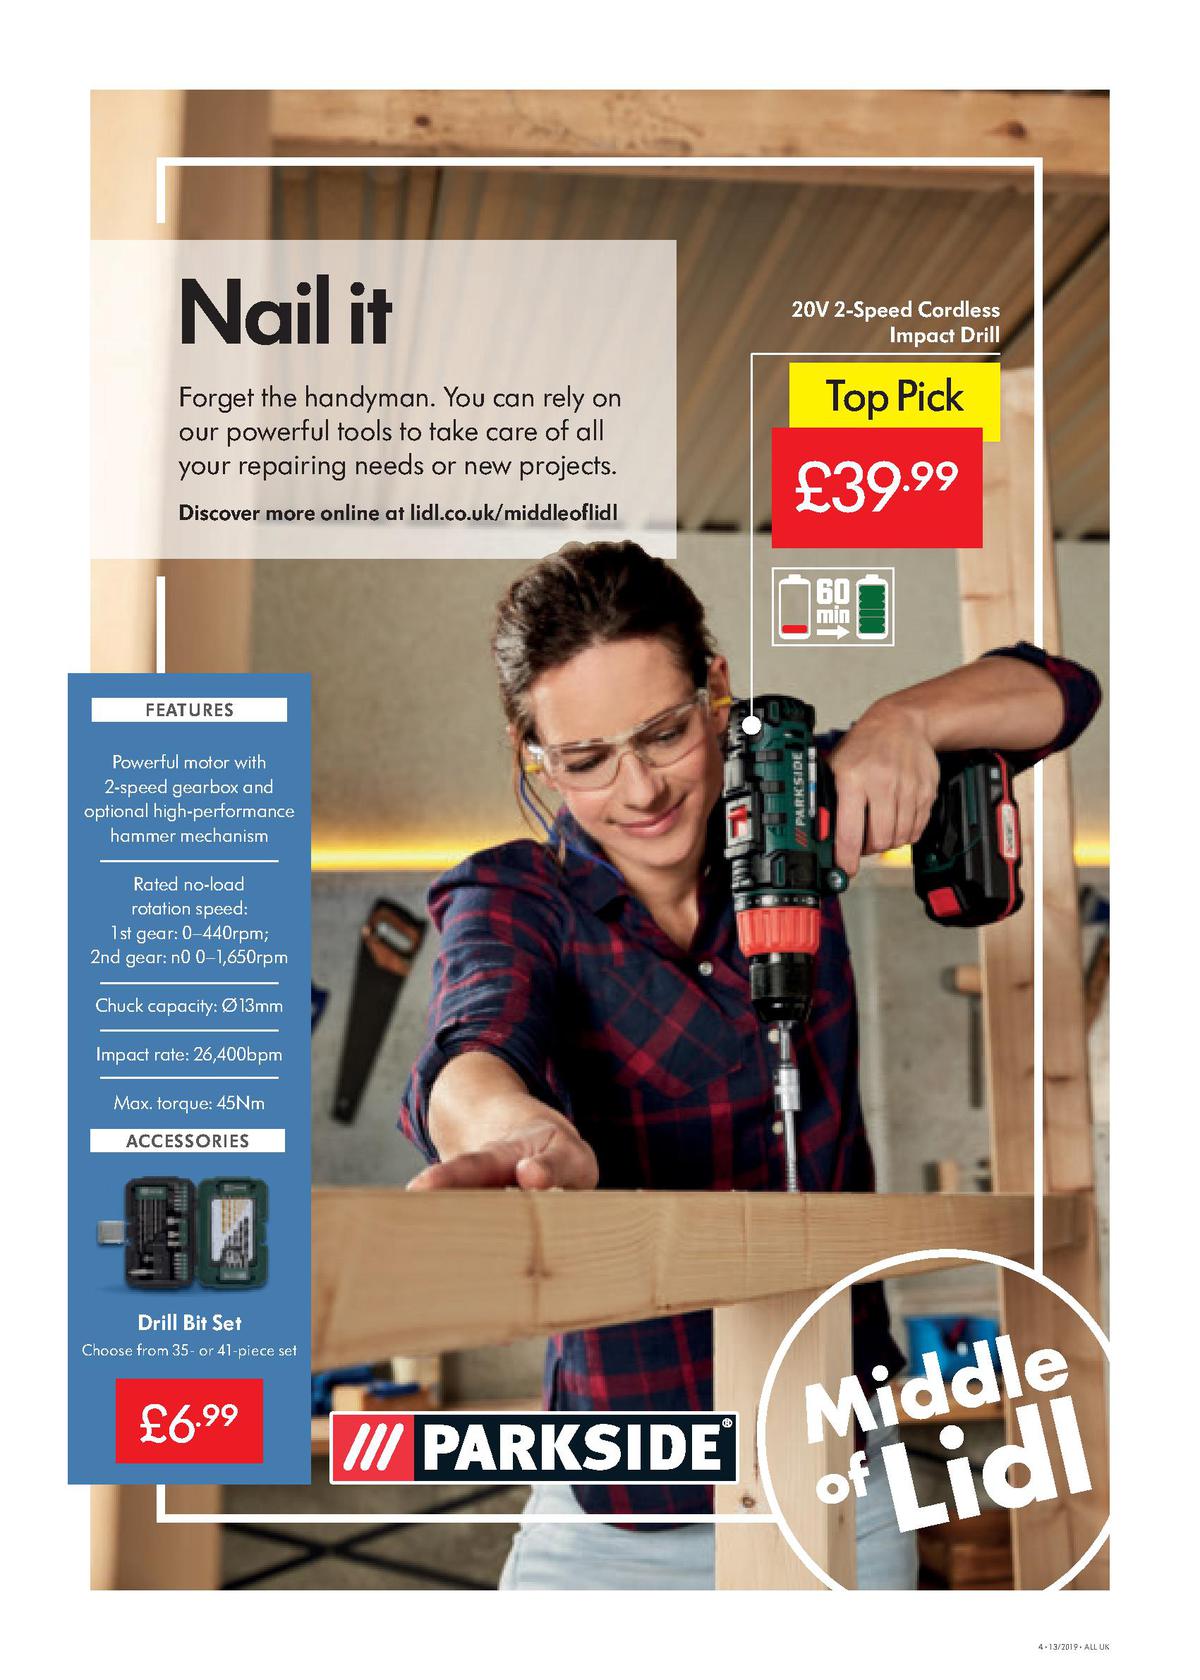 LIDL Offers from 28 March